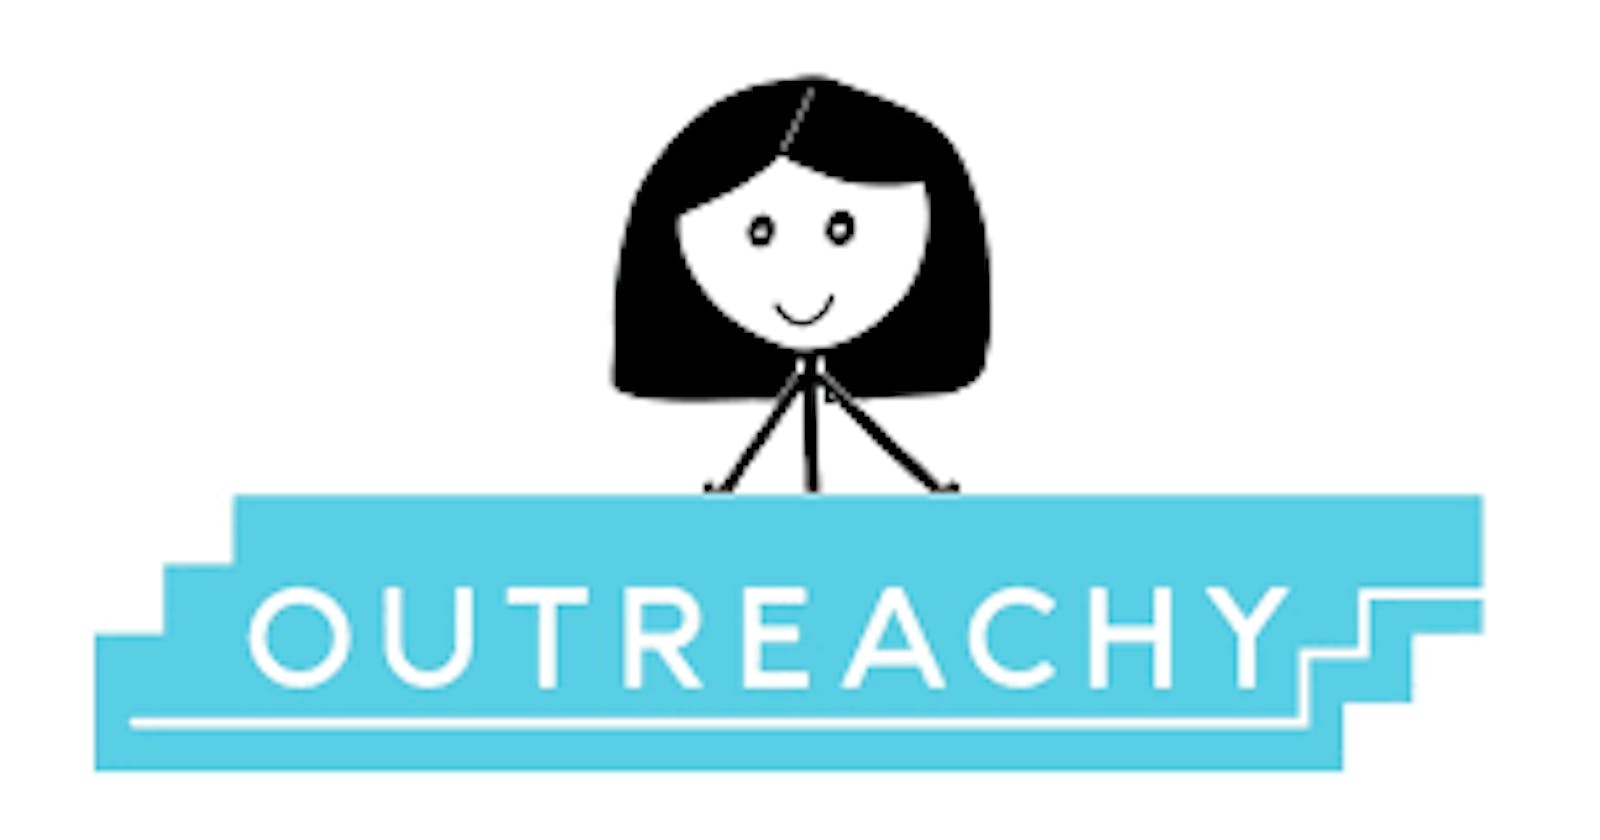 Outreachy: The beginning of my monumental Journey